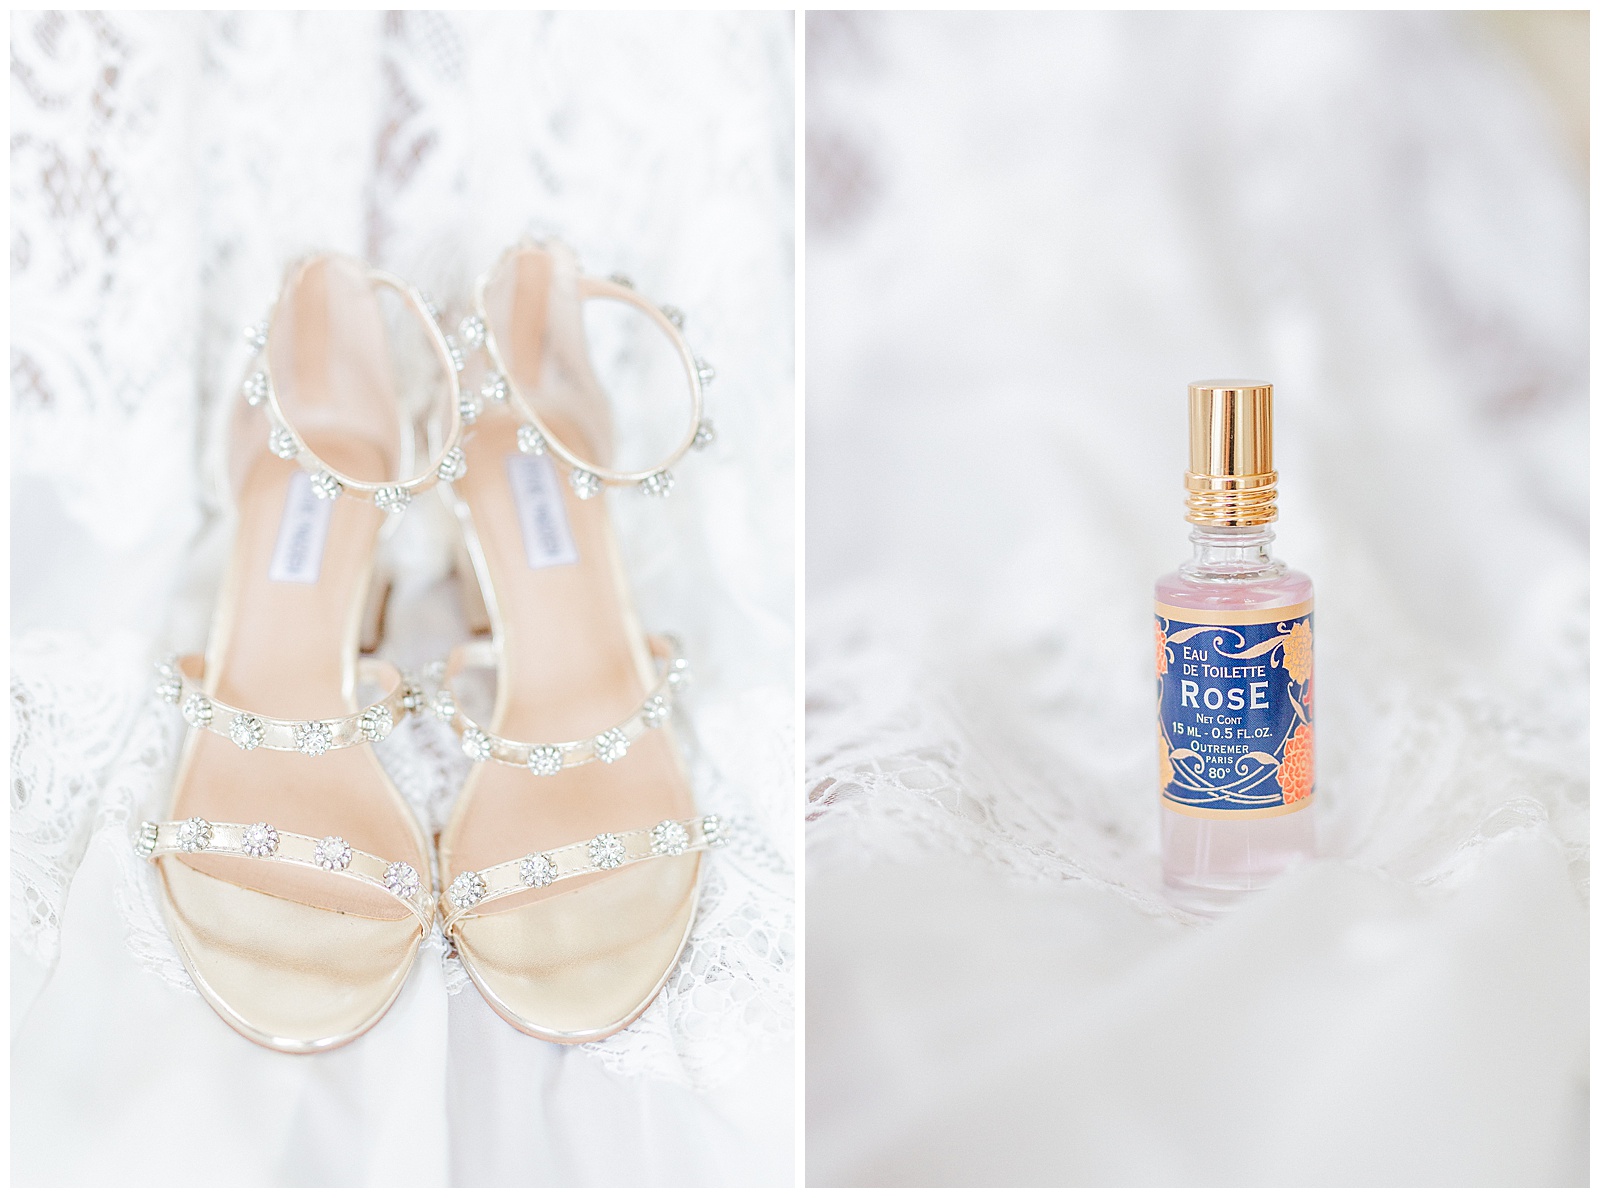 Strappy Rhinestone Sandals and Eau de Toilette Rose - Bright Boho Chic Theme in Charlotte, North Carolina | check out the full wedding at KevynDixonPhoto.com